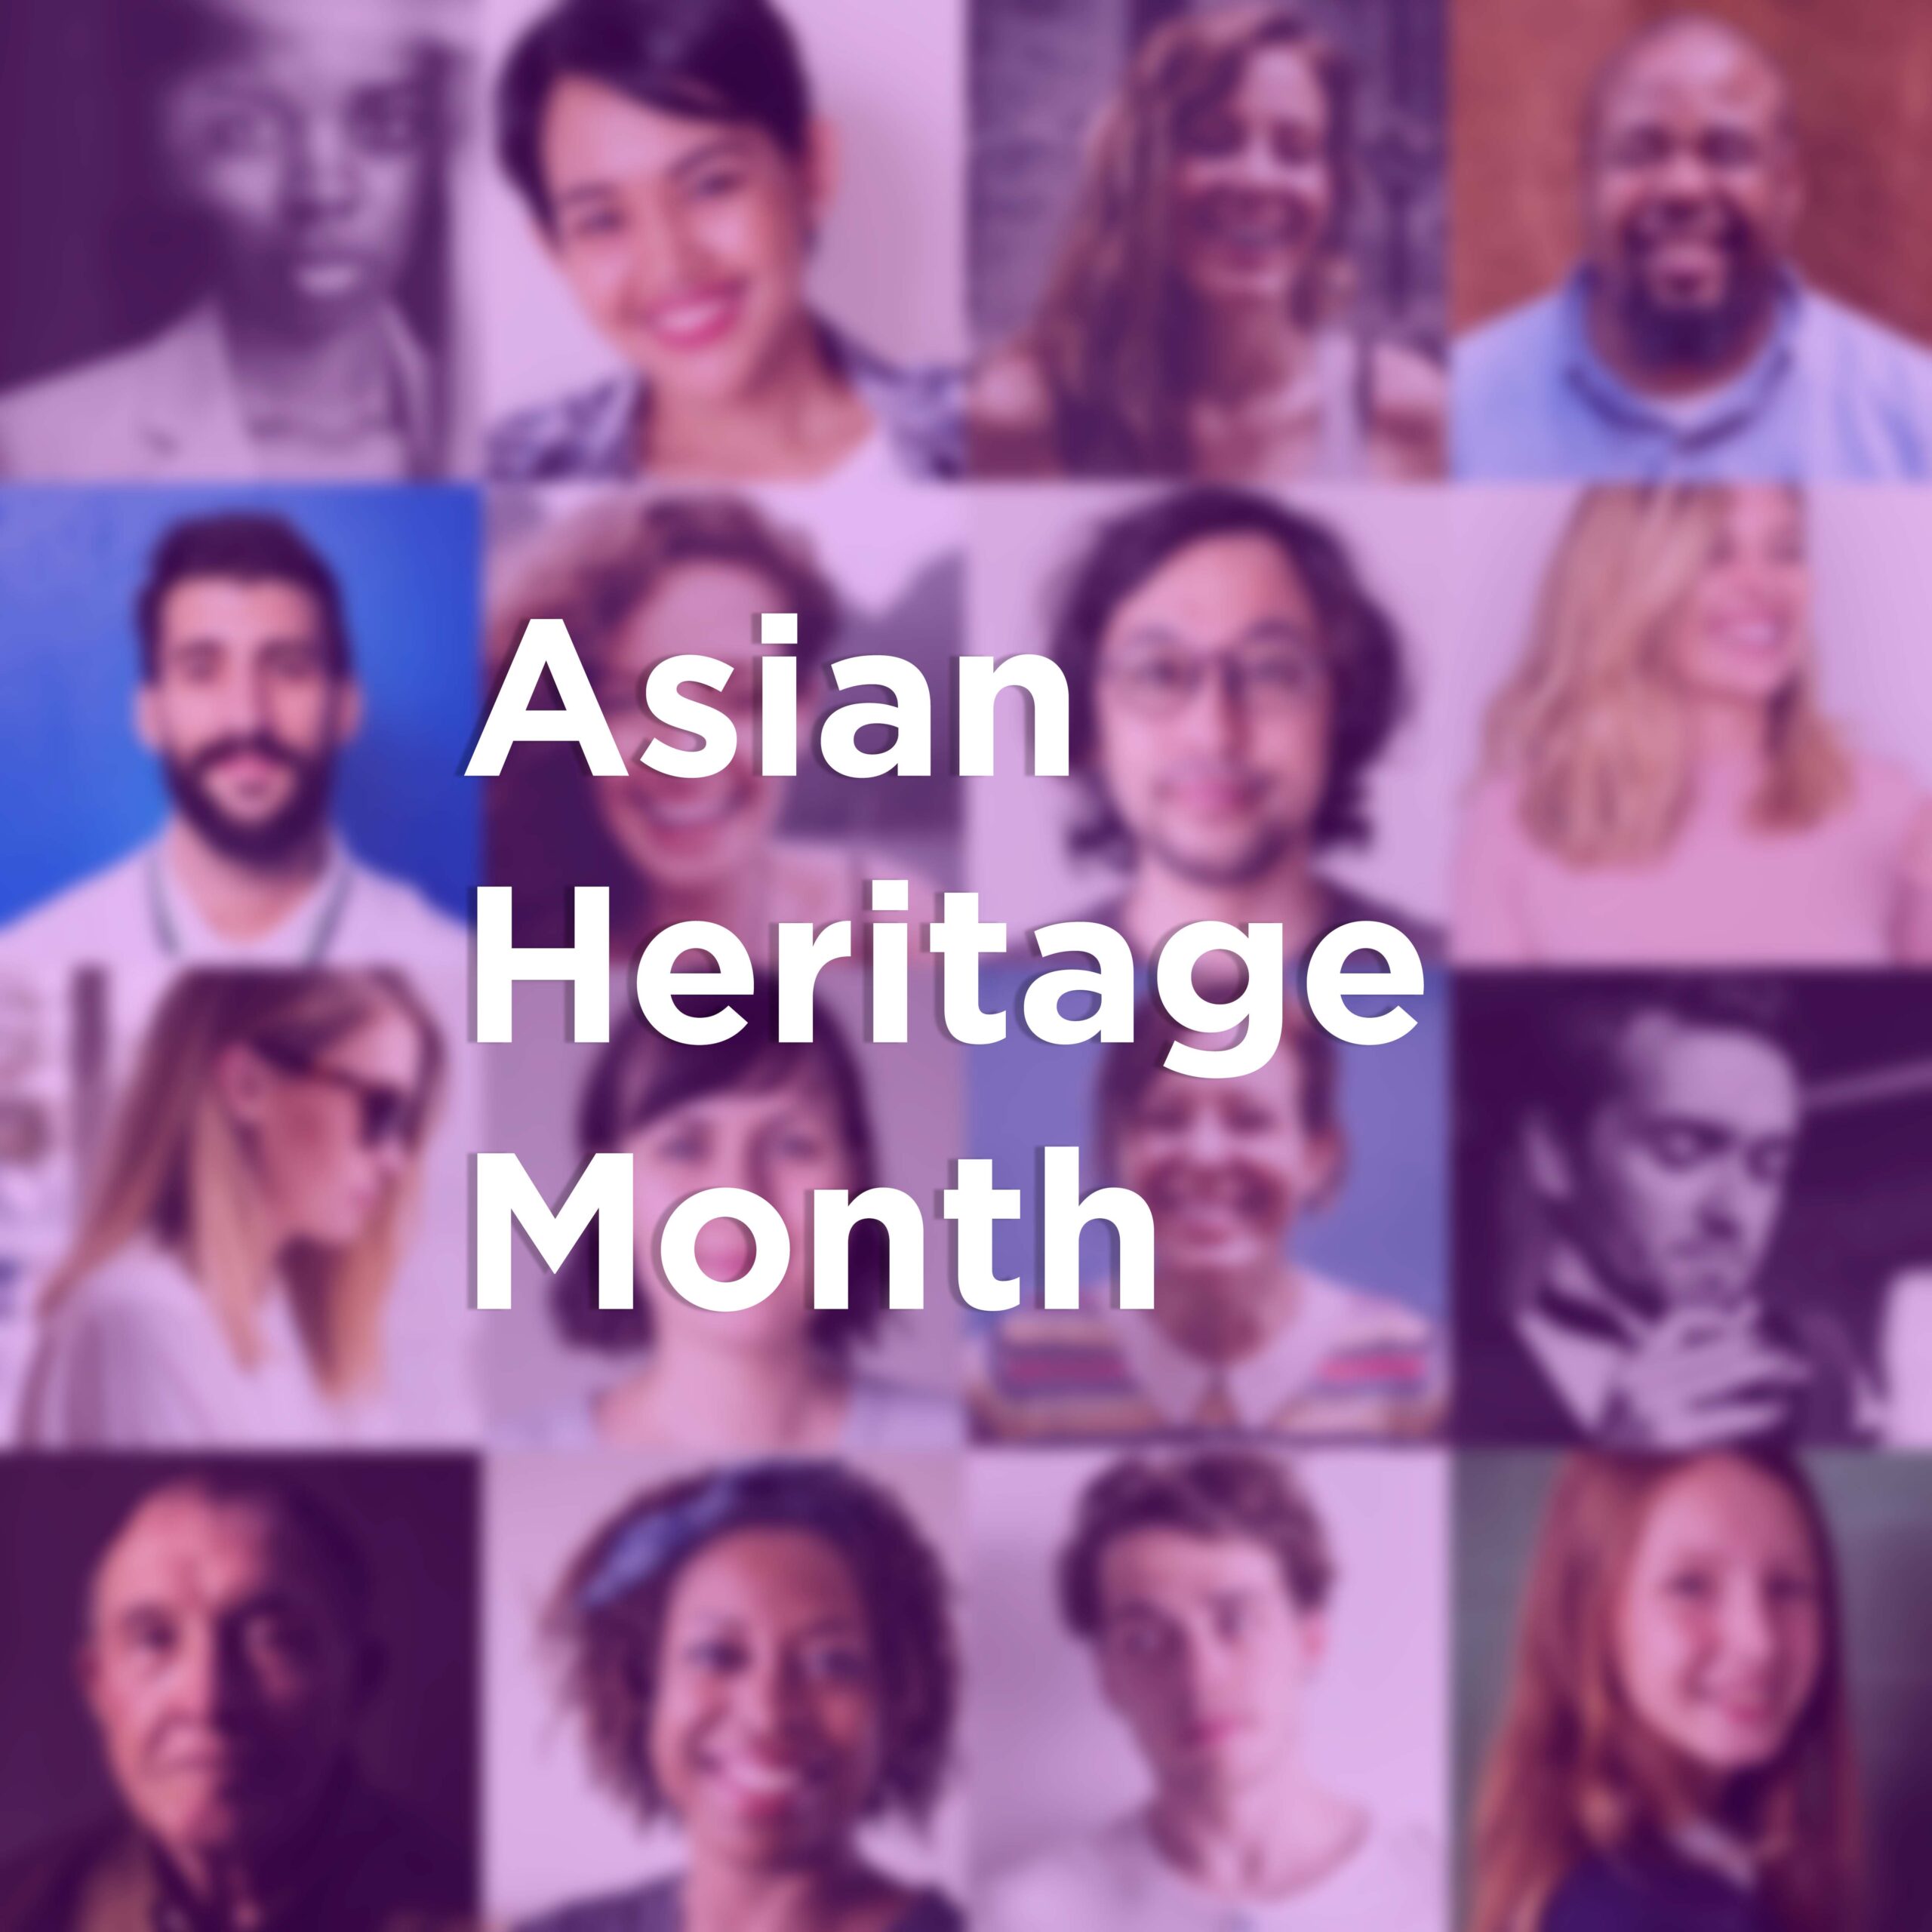 The Significance of Asian Heritage Month